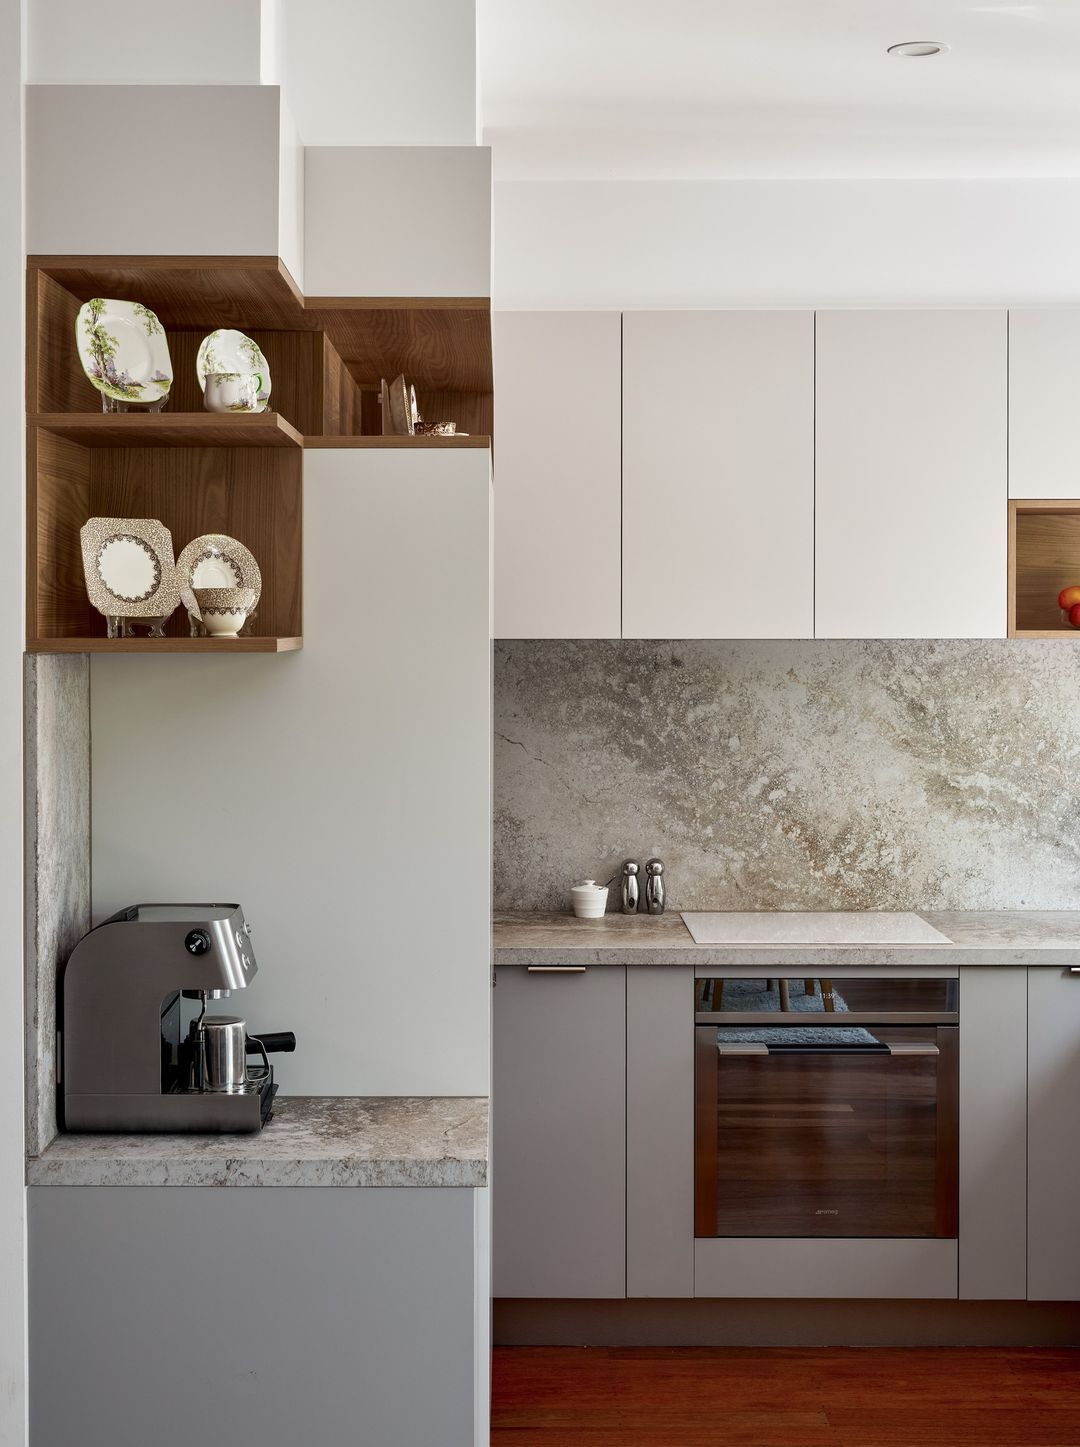 Warm and earthy kitchen trends